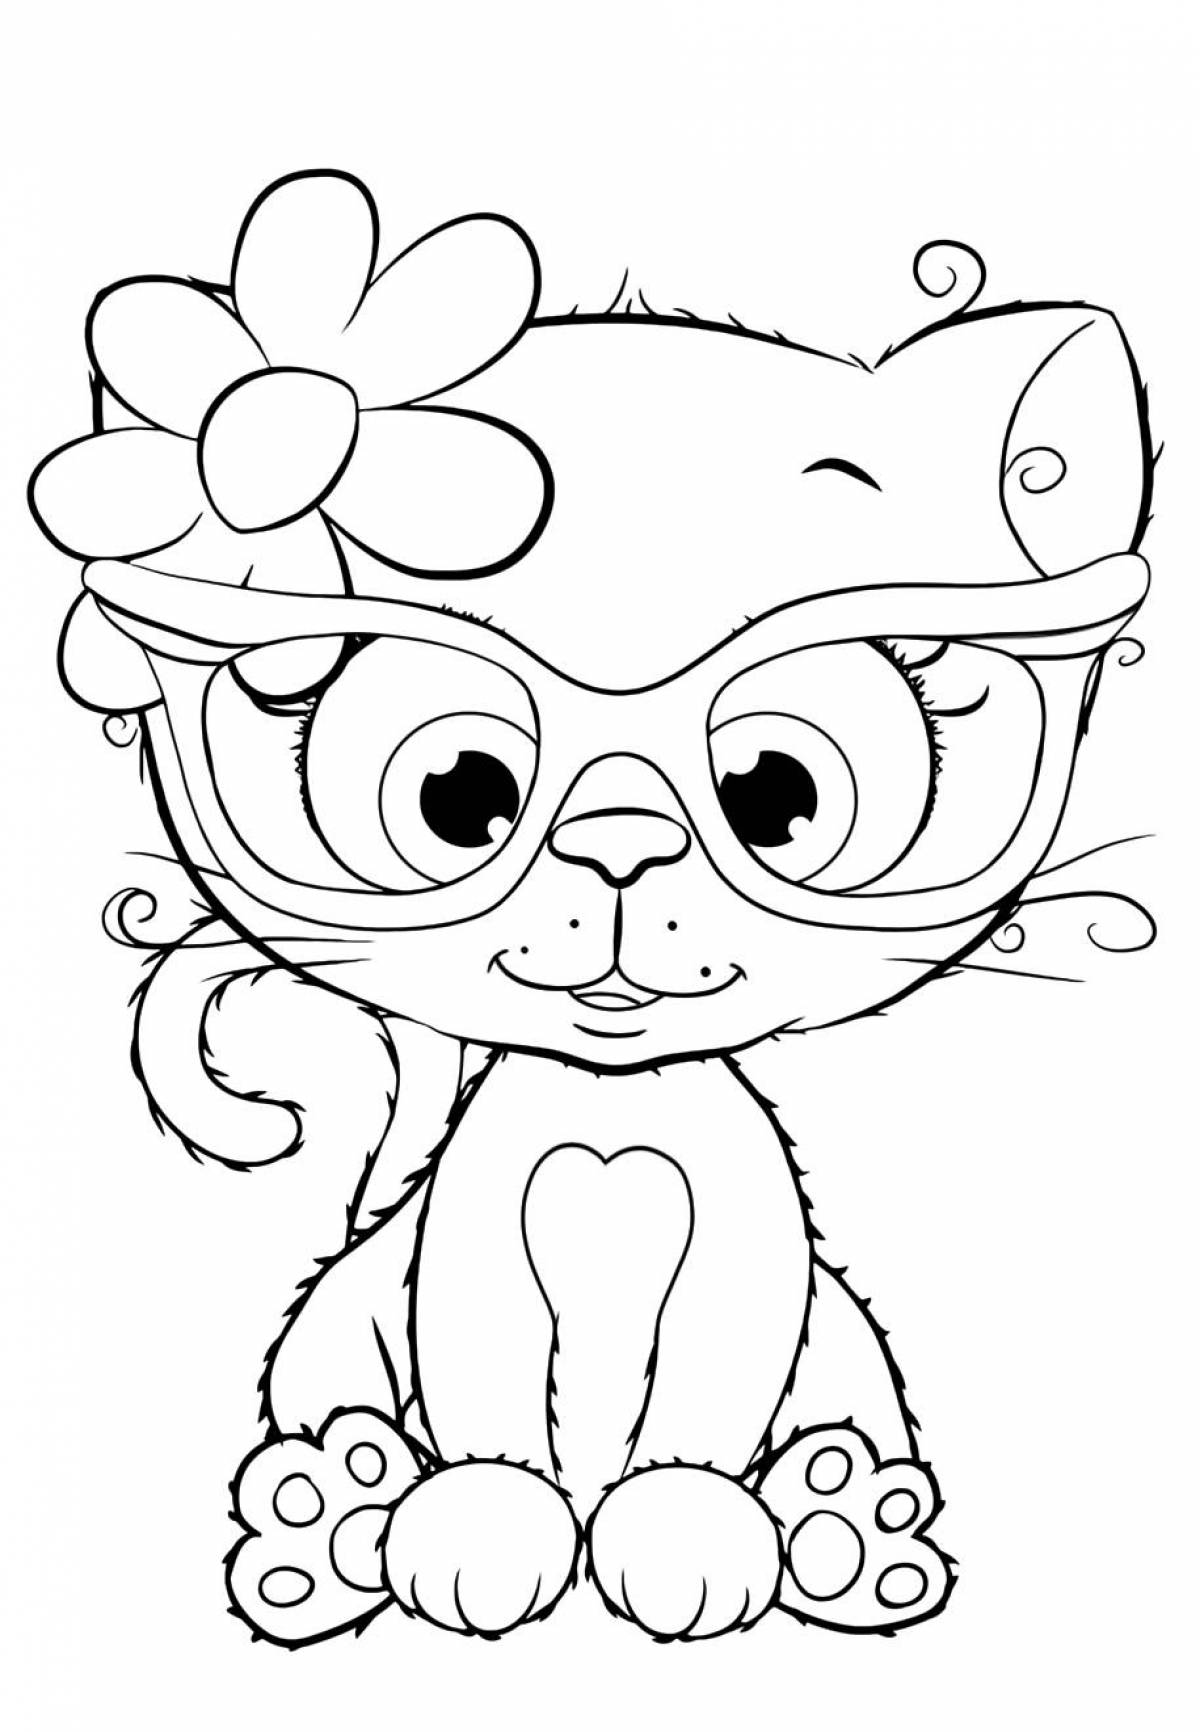 Play kitten coloring page